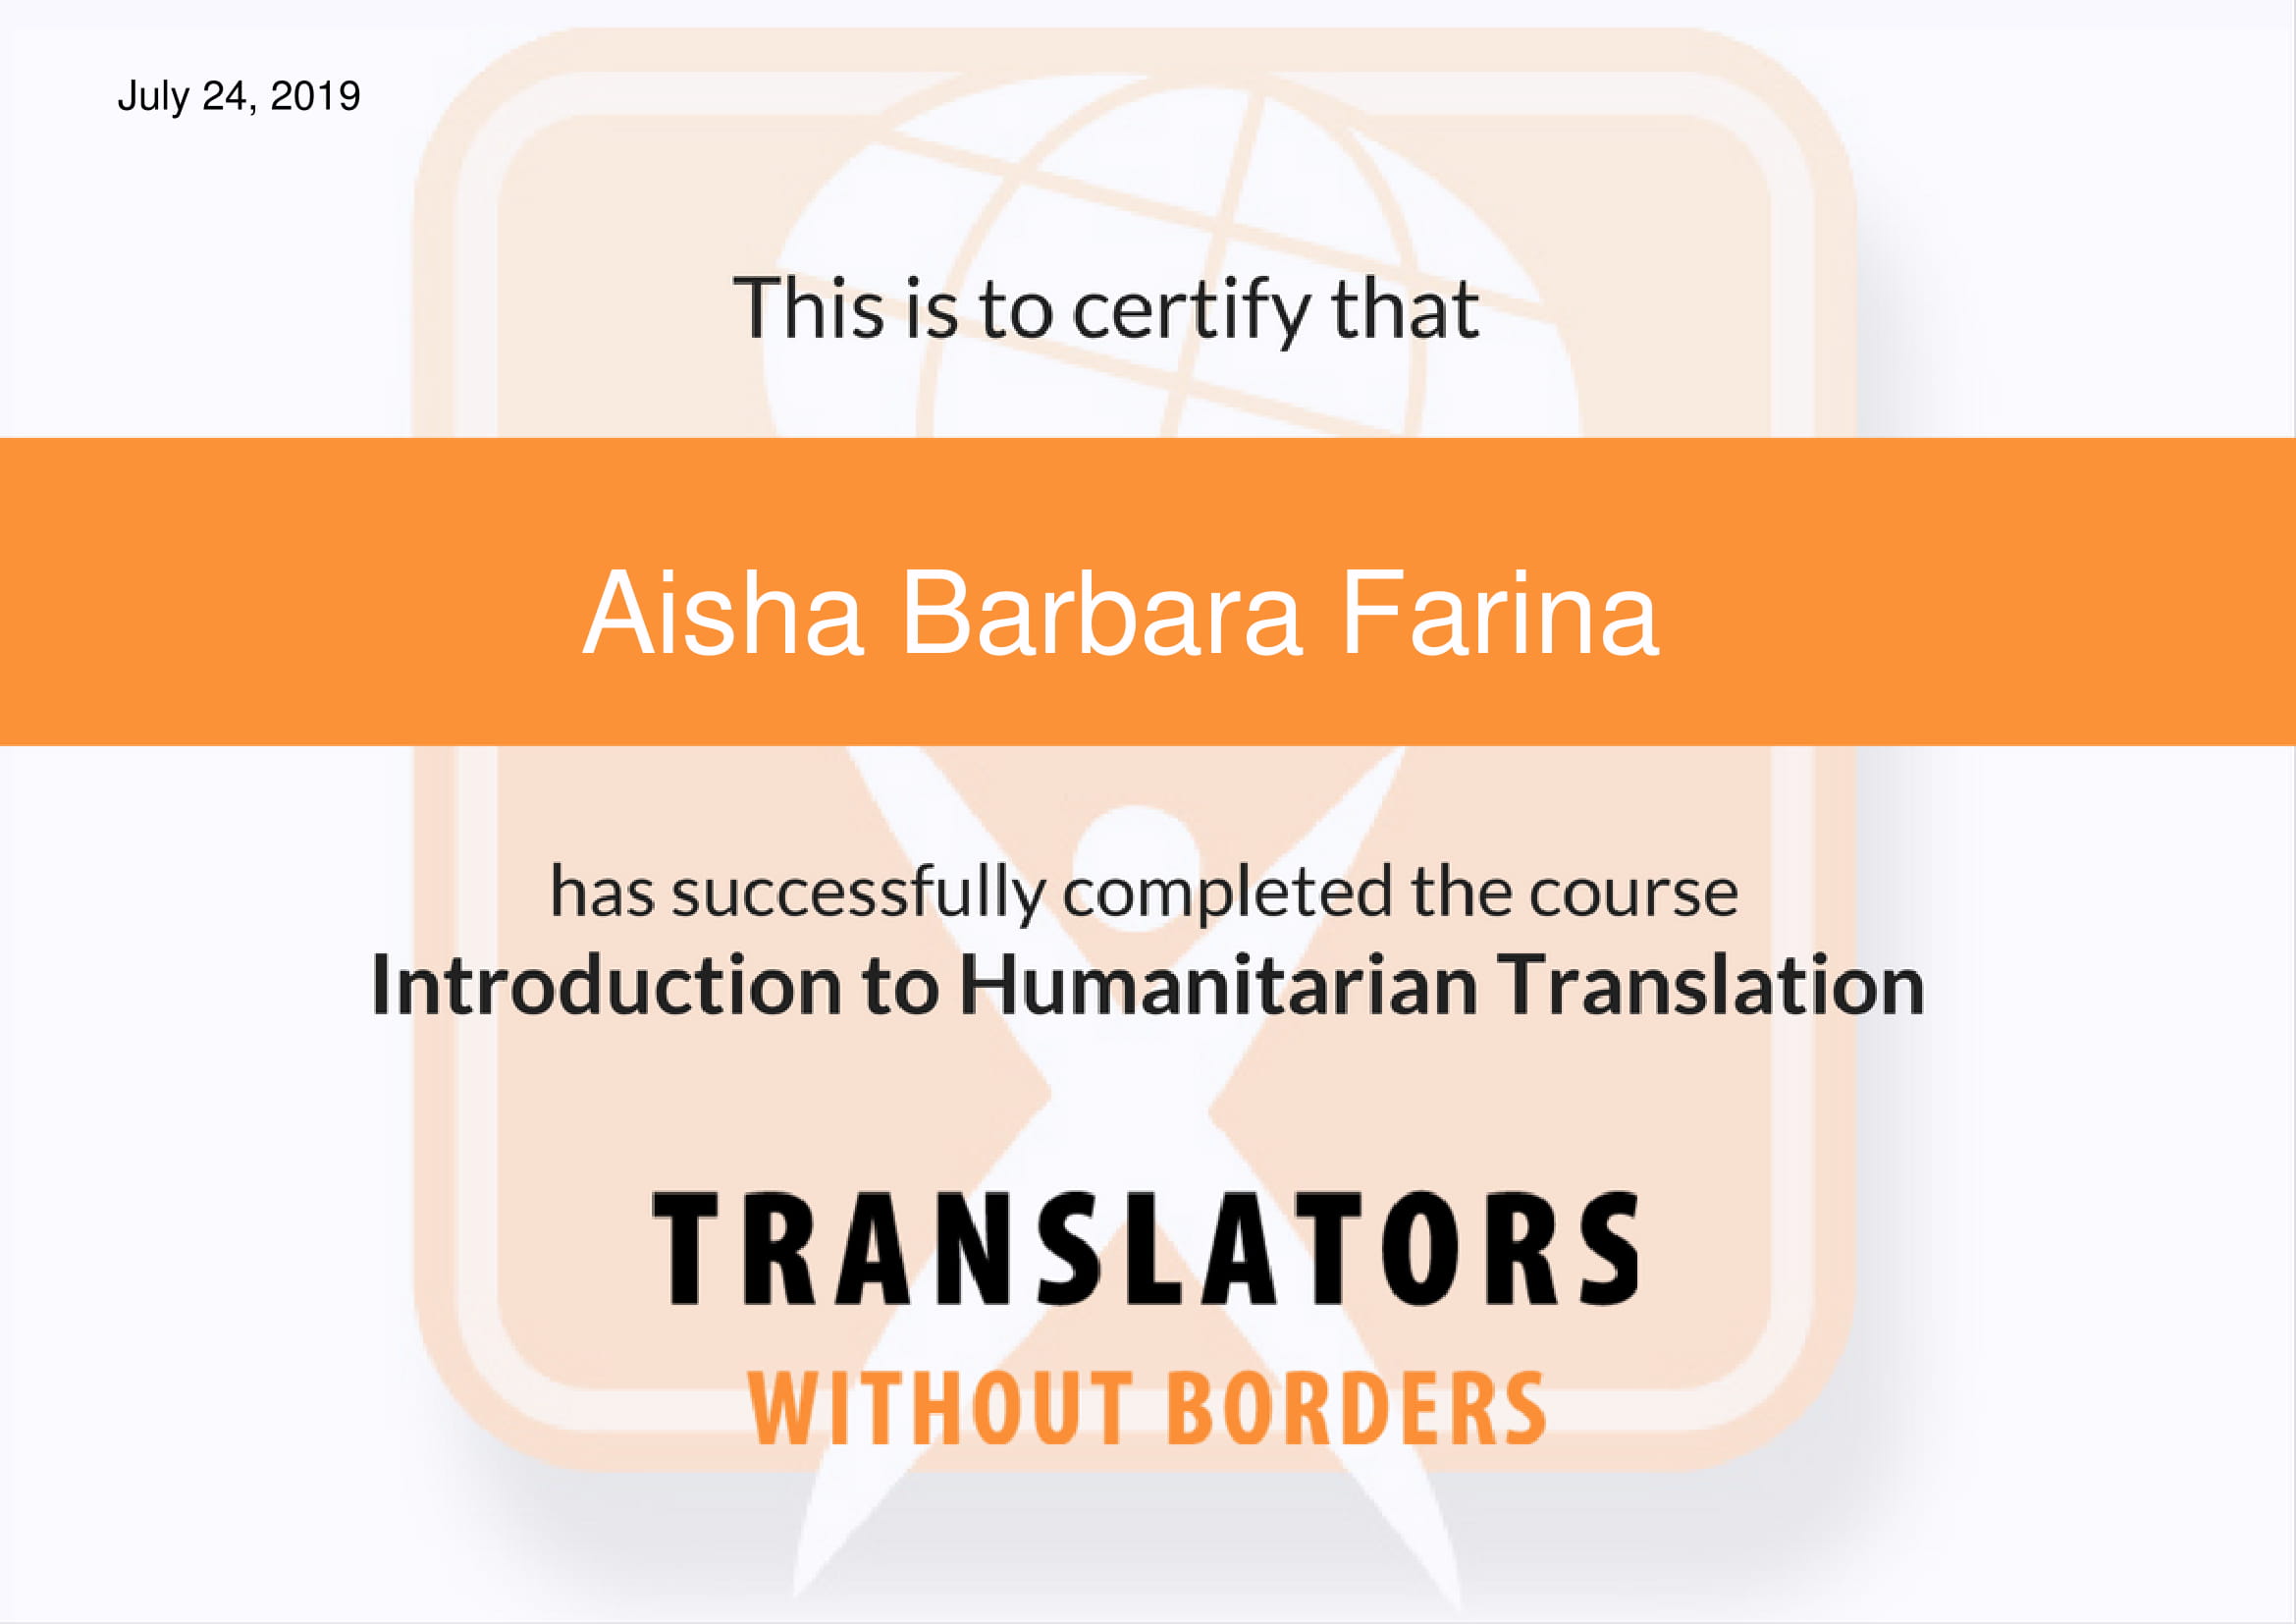 Introduction_to_Humanitarian_Translation_-_Certificate_of_Completion-1